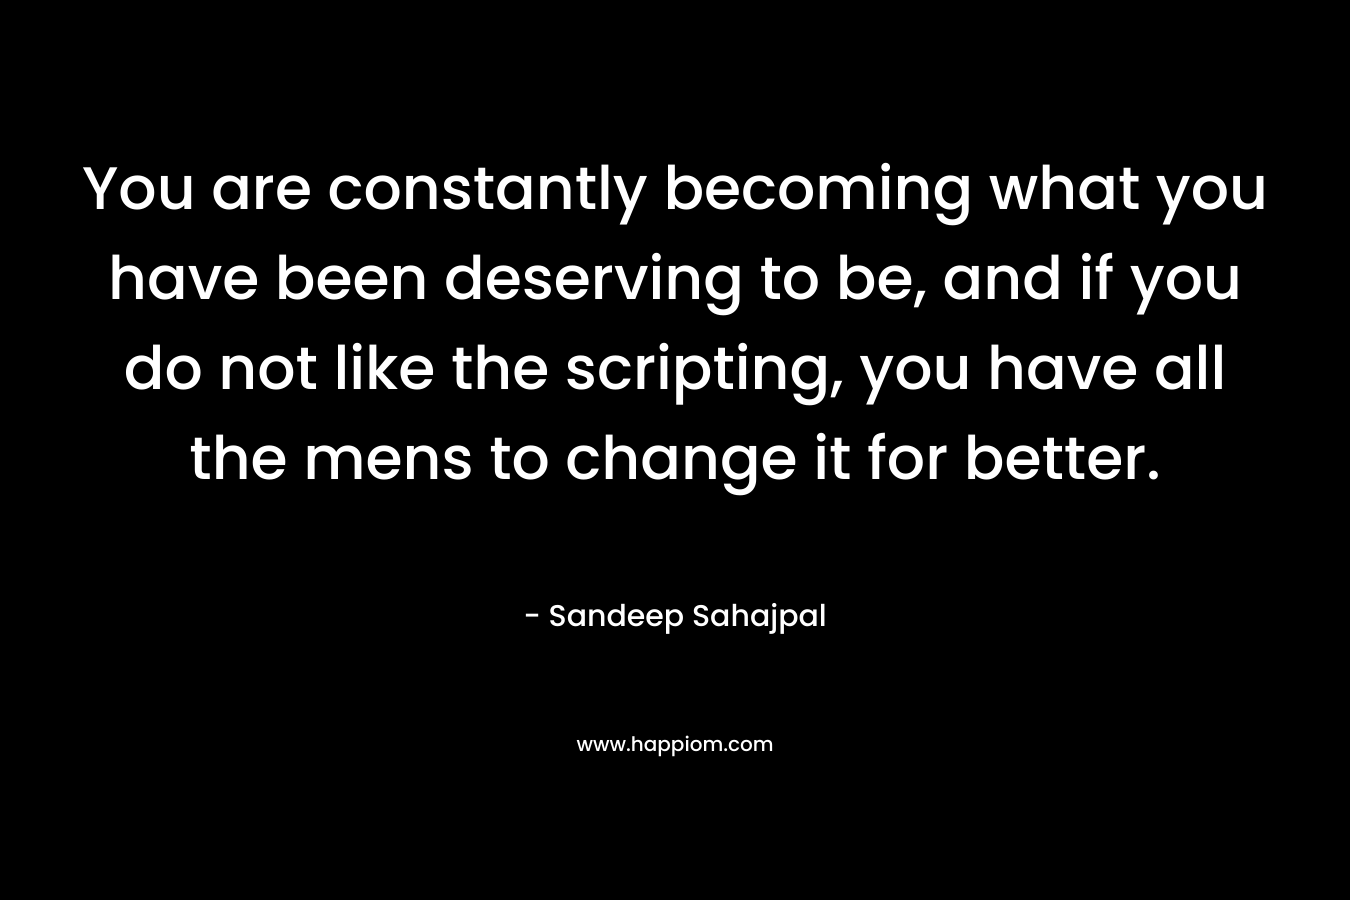 You are constantly becoming what you have been deserving to be, and if you do not like the scripting, you have all the mens to change it for better.